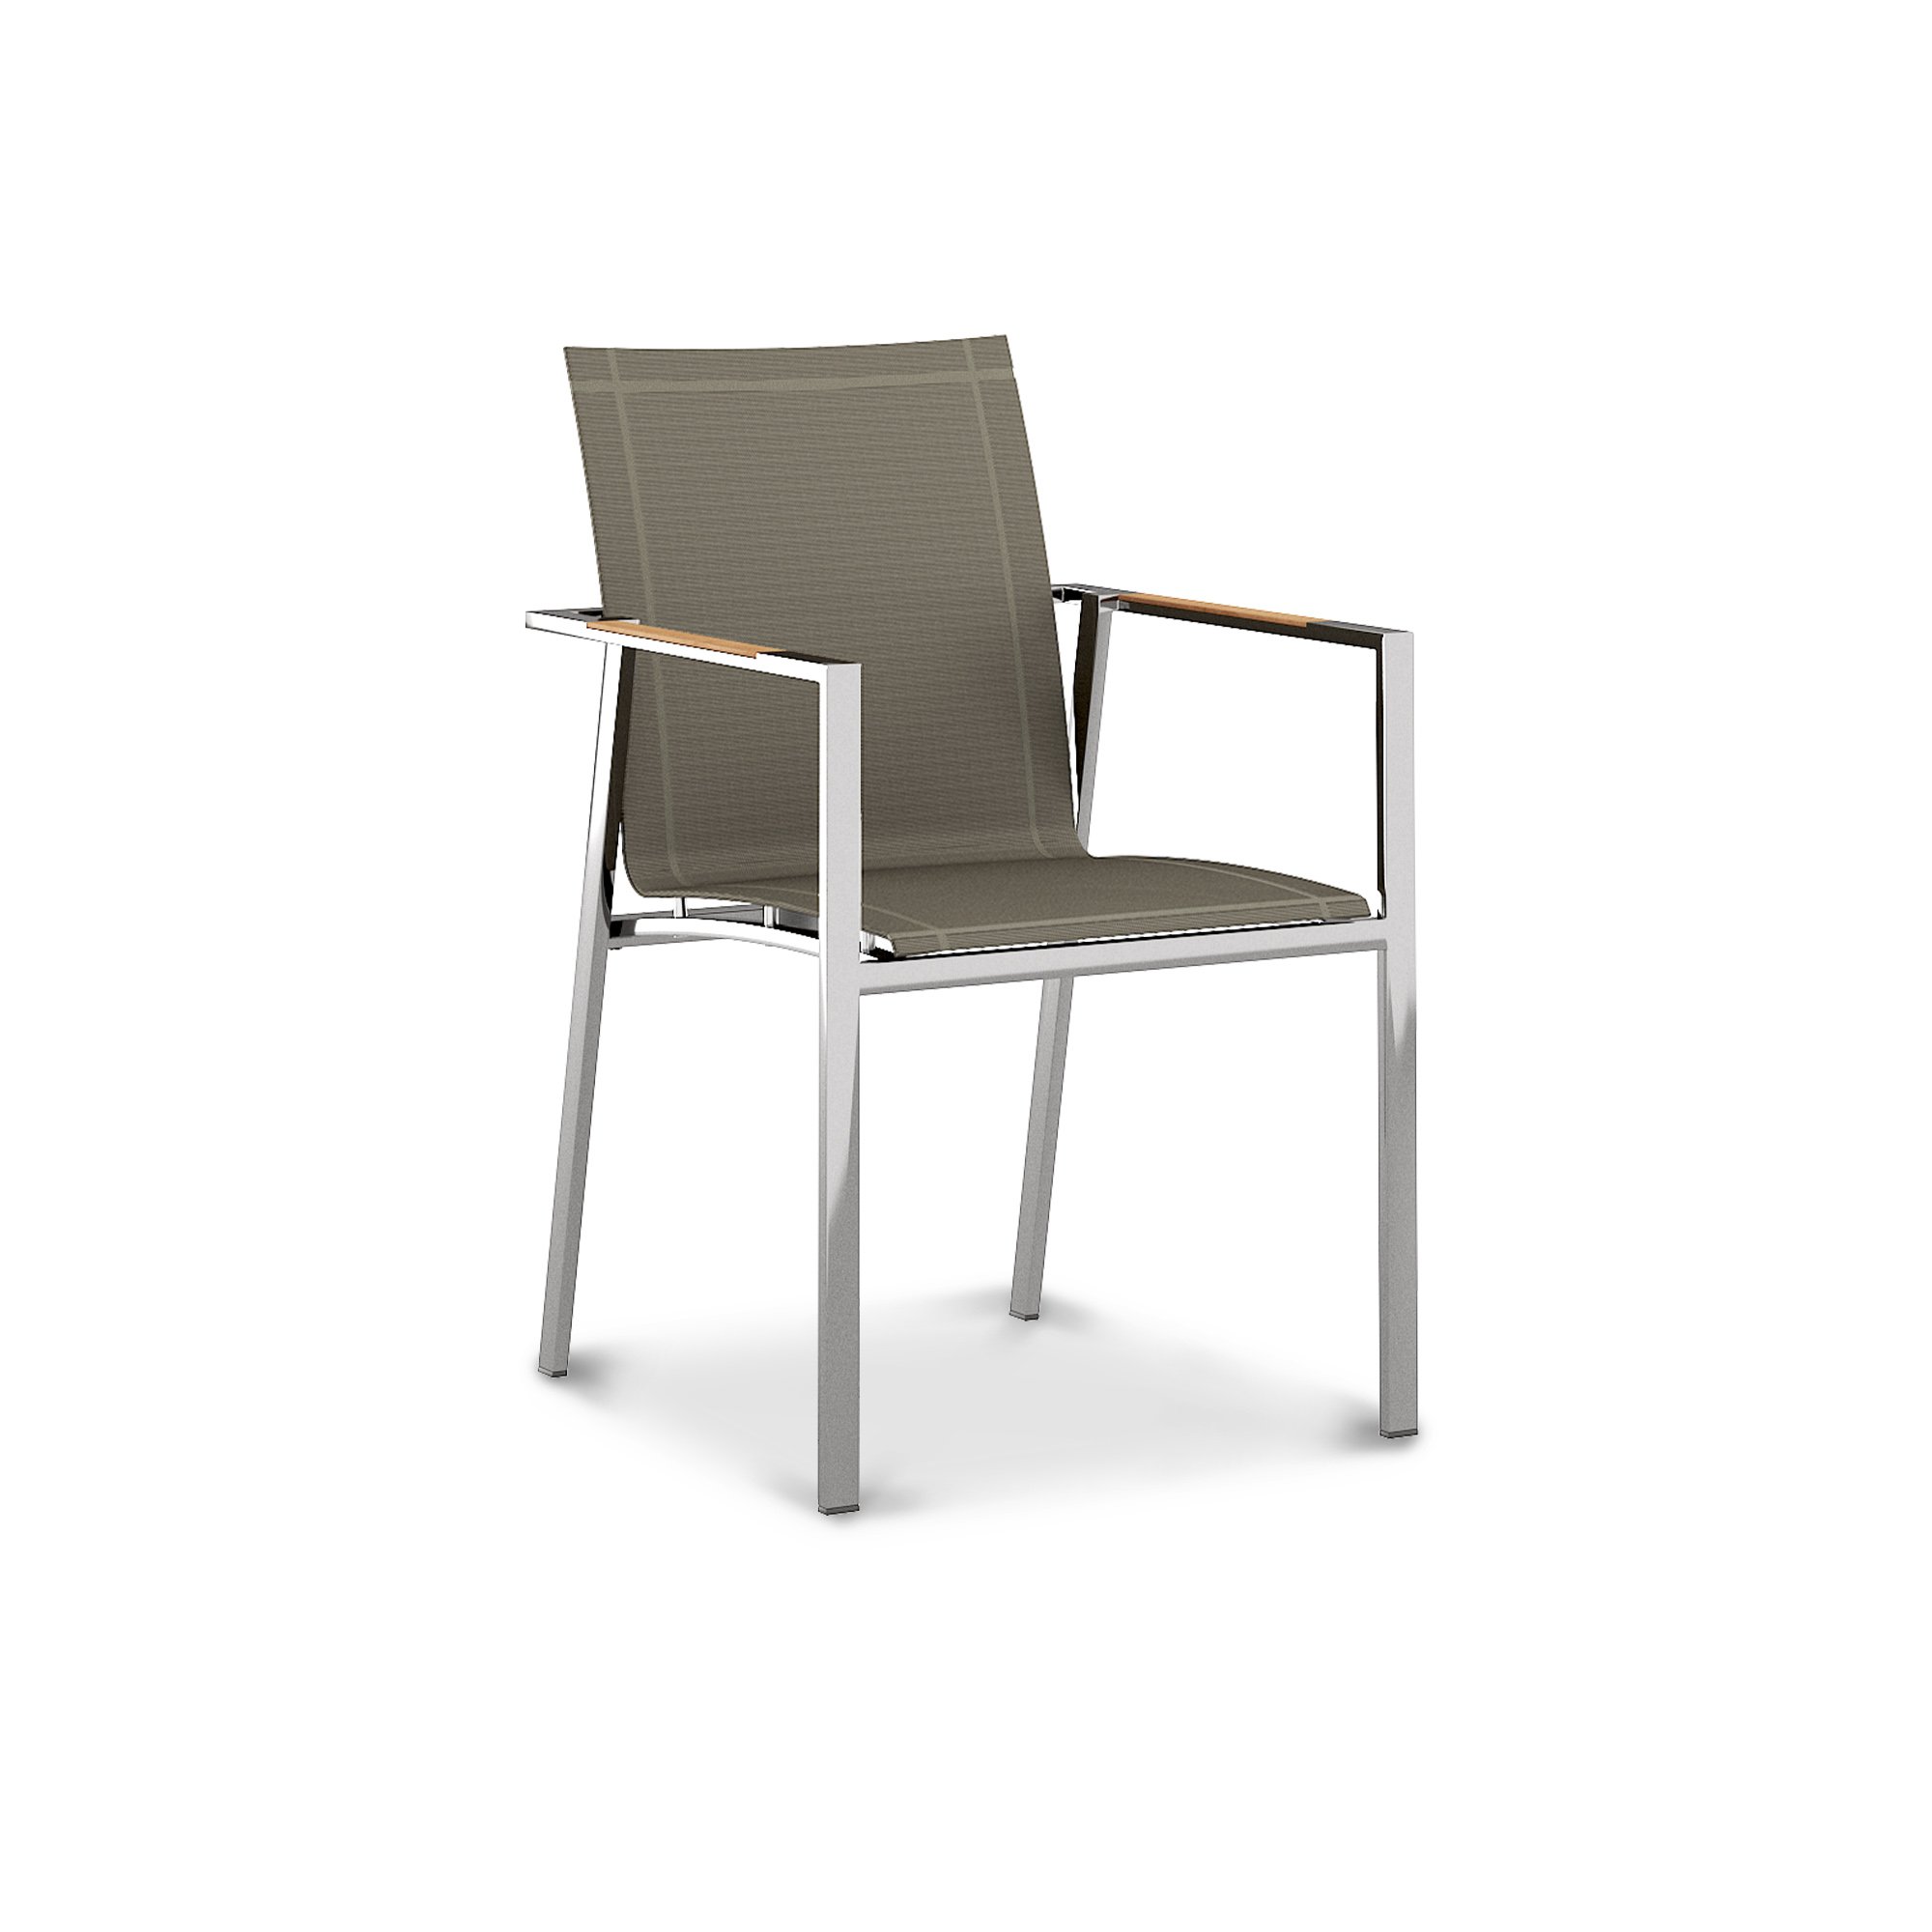 Moda™ Stacking Sling Chair